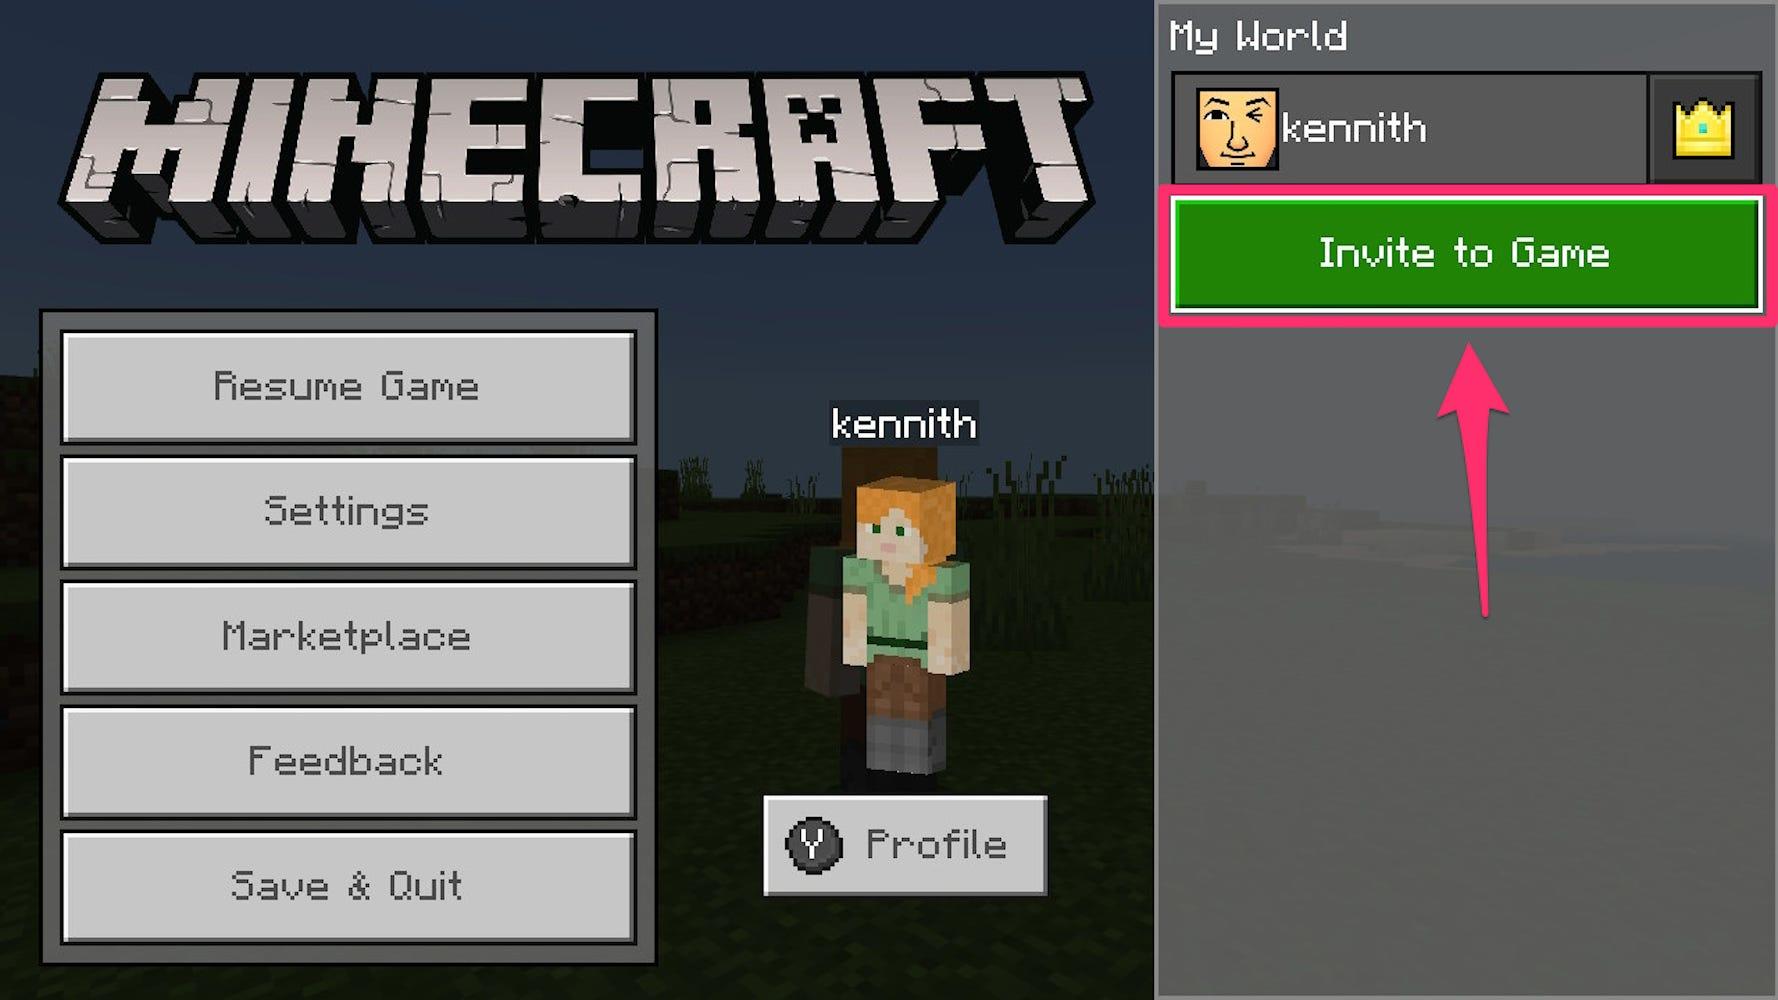 Minecraft Cross-Platform: Play with Friends on Any Device